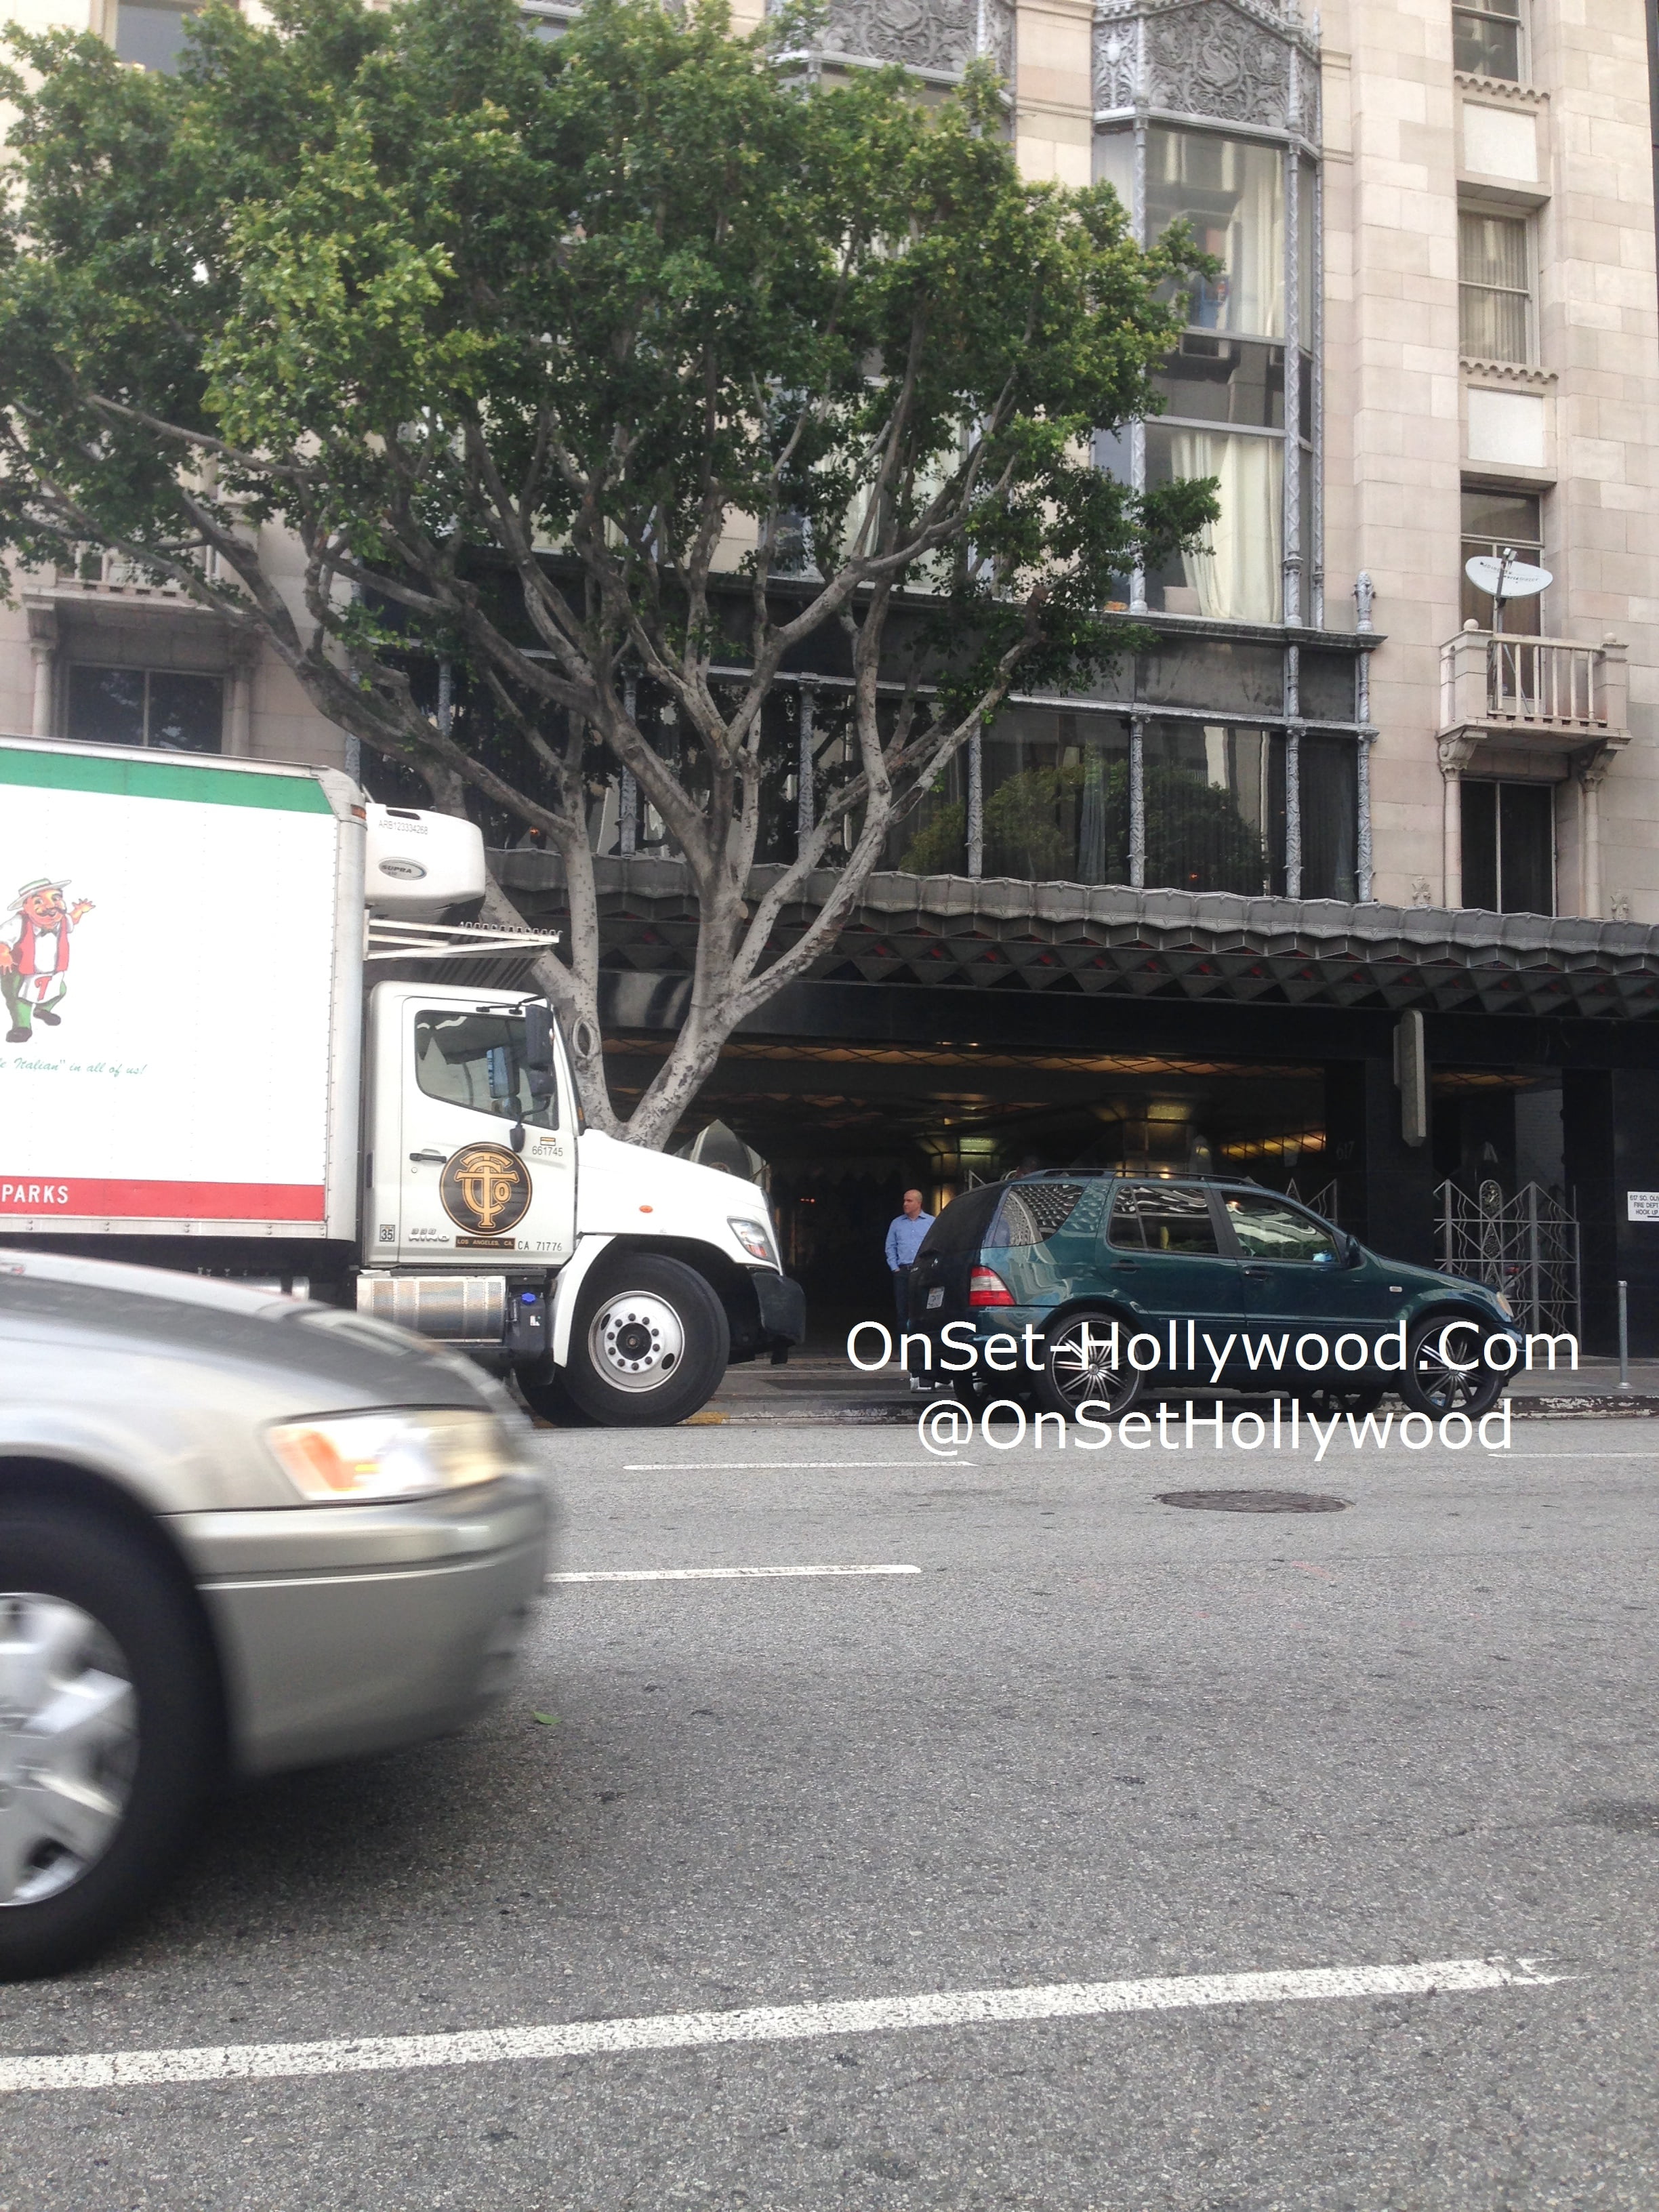 american-horror-story-hotel-filming-locations-pic2